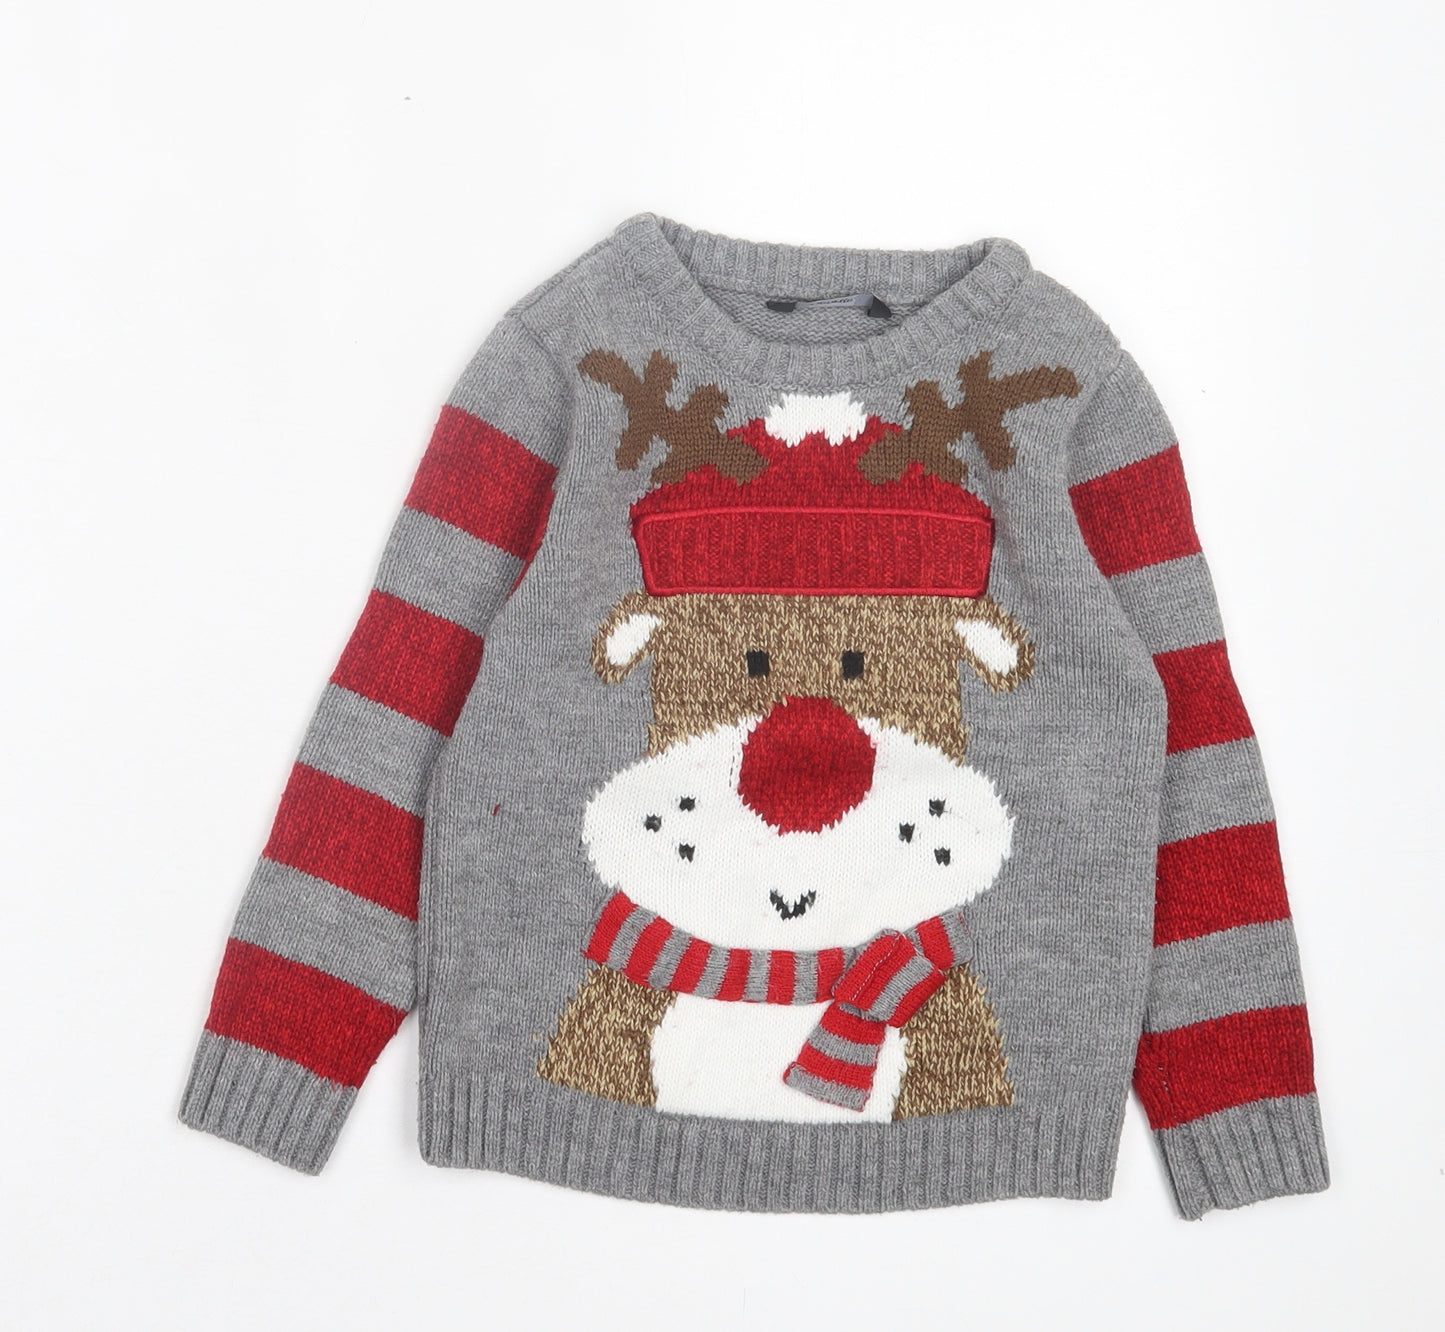 George Girls Grey Crew Neck Striped Acrylic Pullover Jumper Size 4-5 Years Pullover - Christmas Reindeer